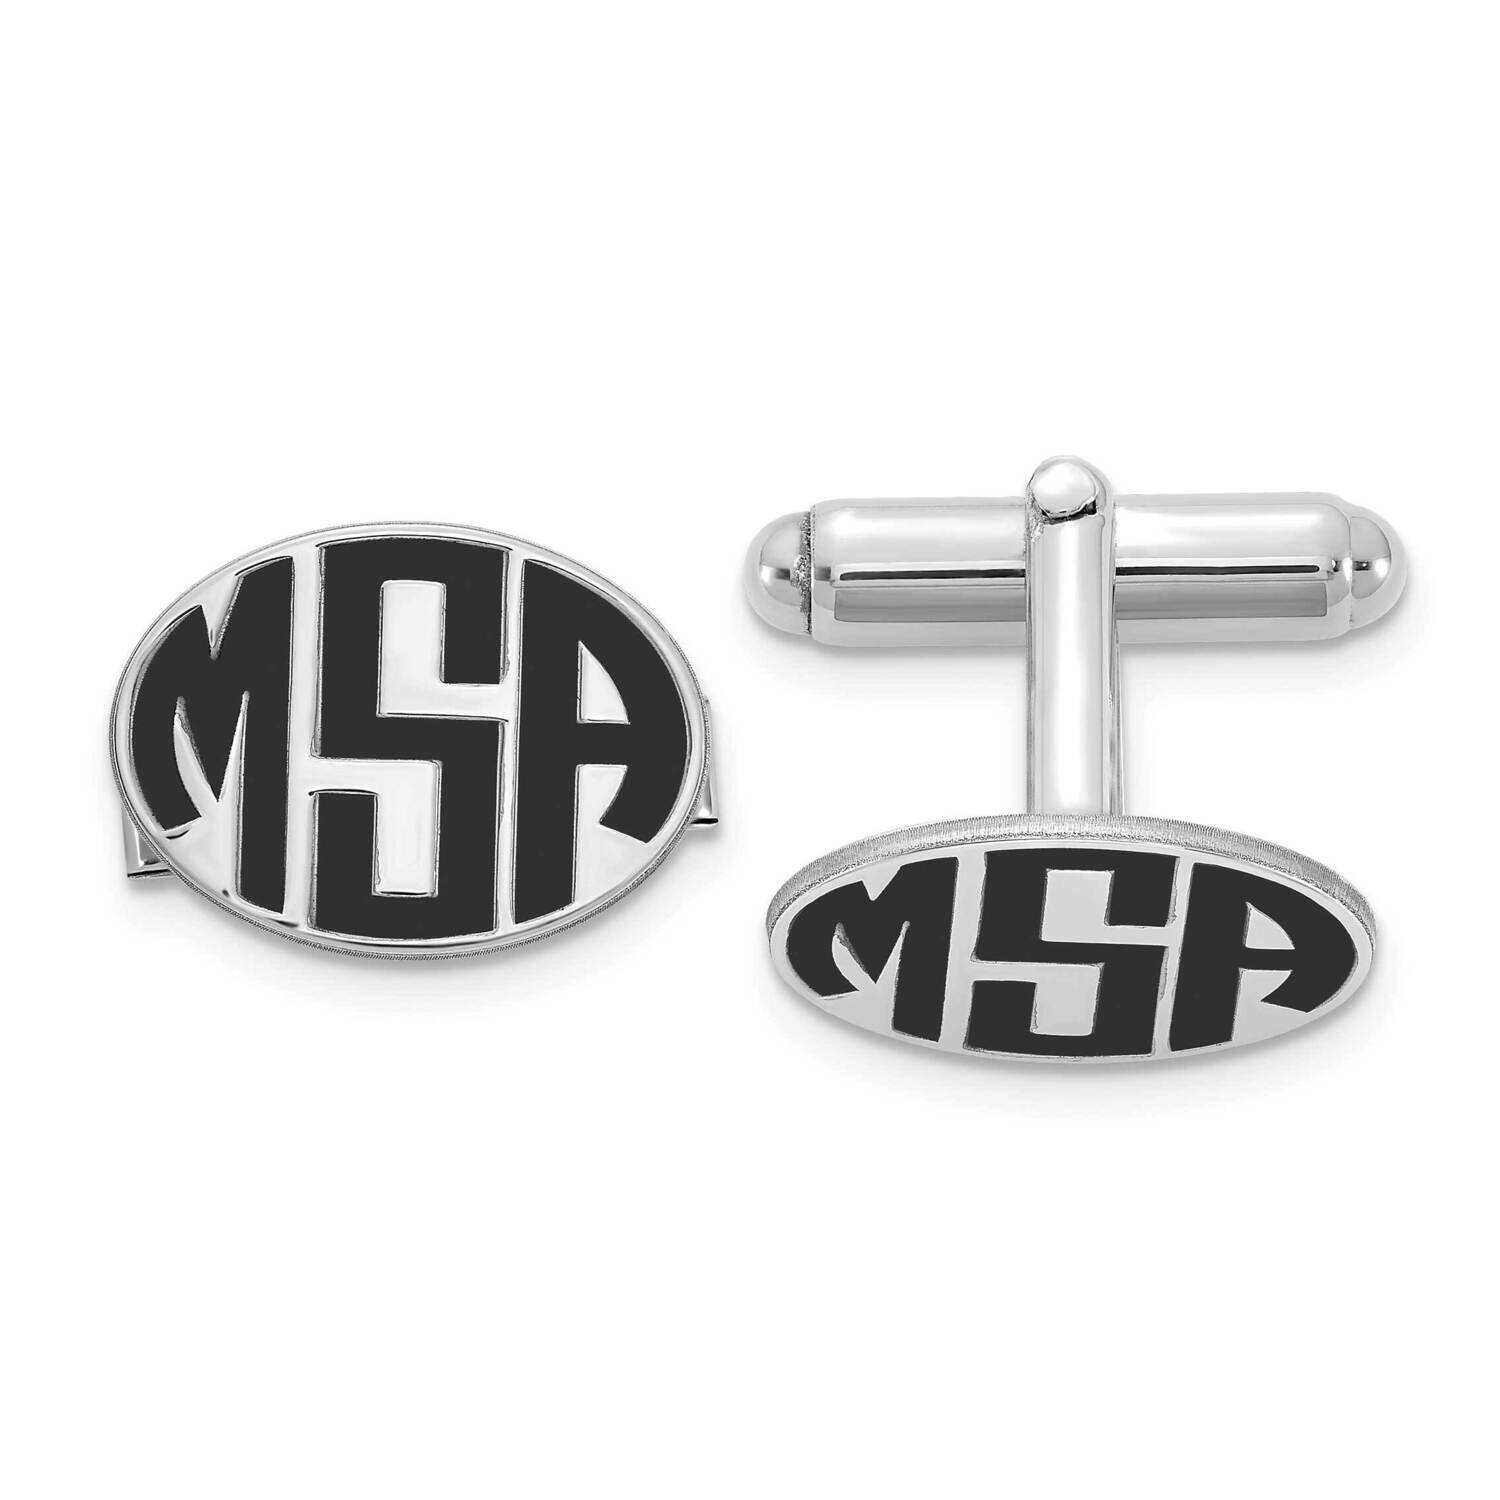 Oval Epoxied Letters Monogram Cufflinks Sterling Silver Rhodium-plated XNA622SS